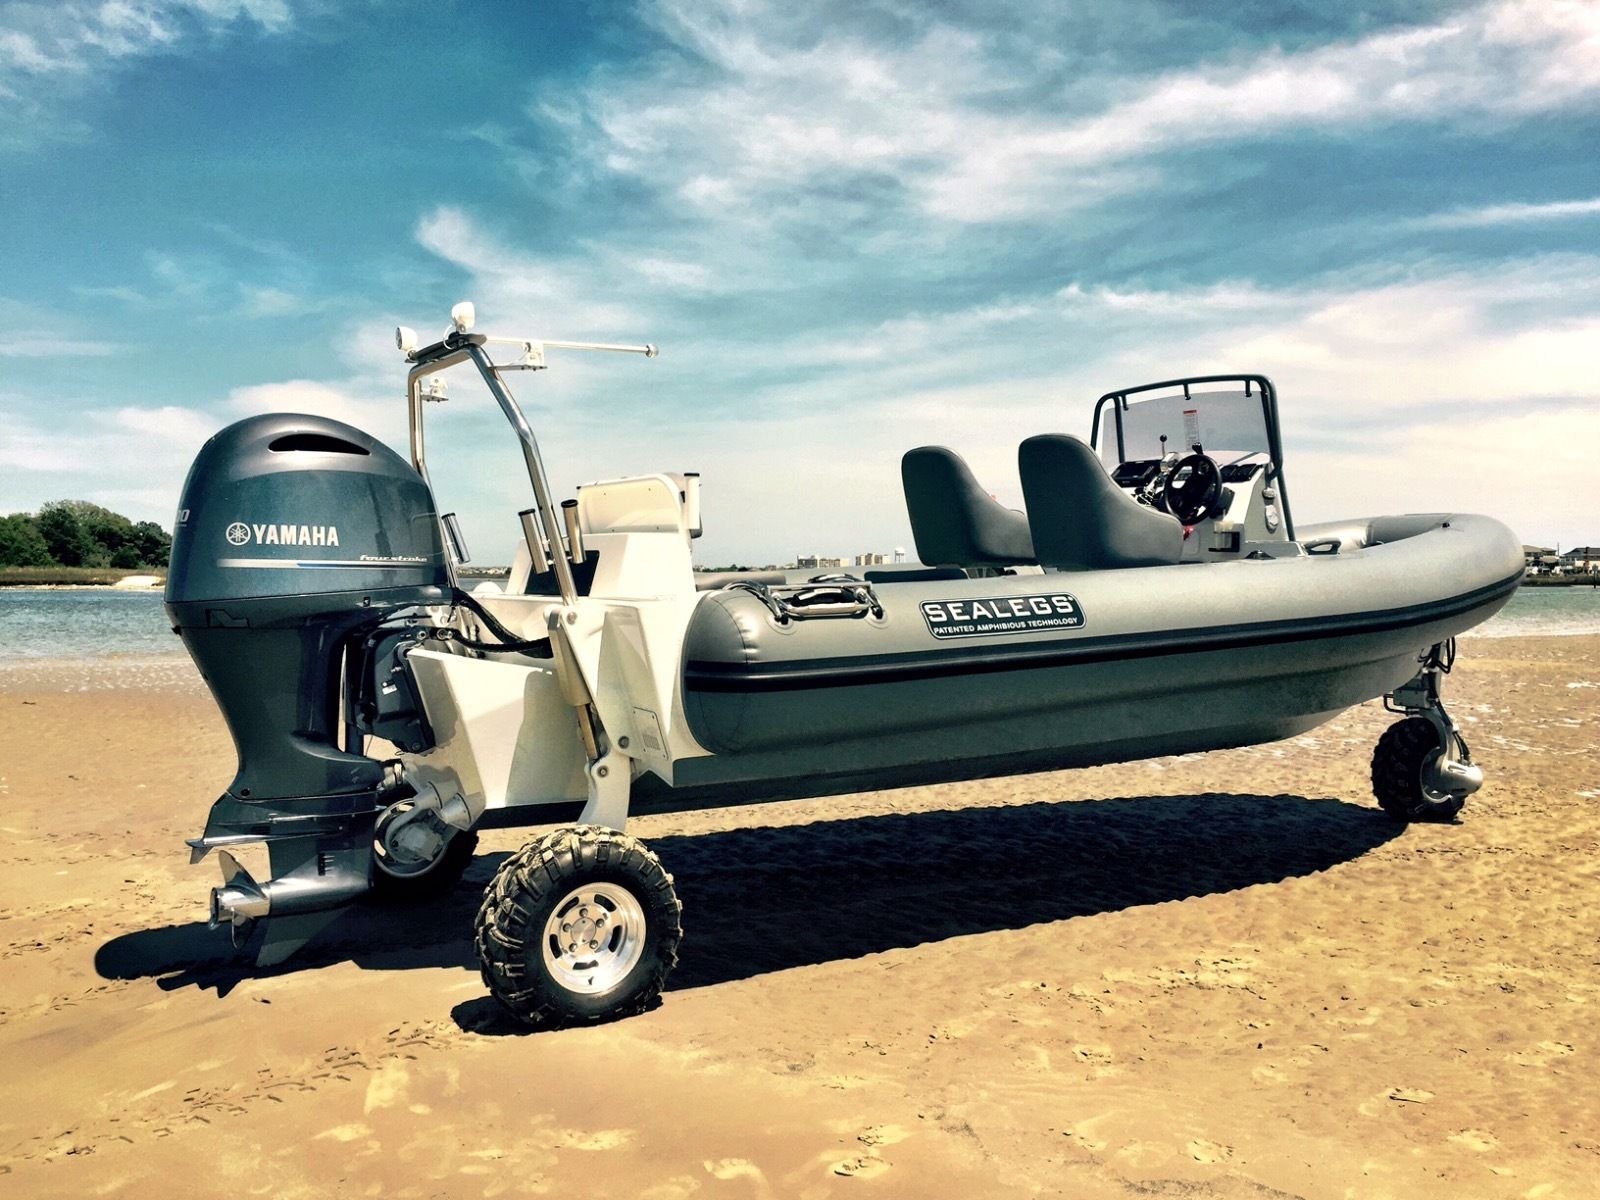 Sealegs Amphibious 2015 for sale for 148,000